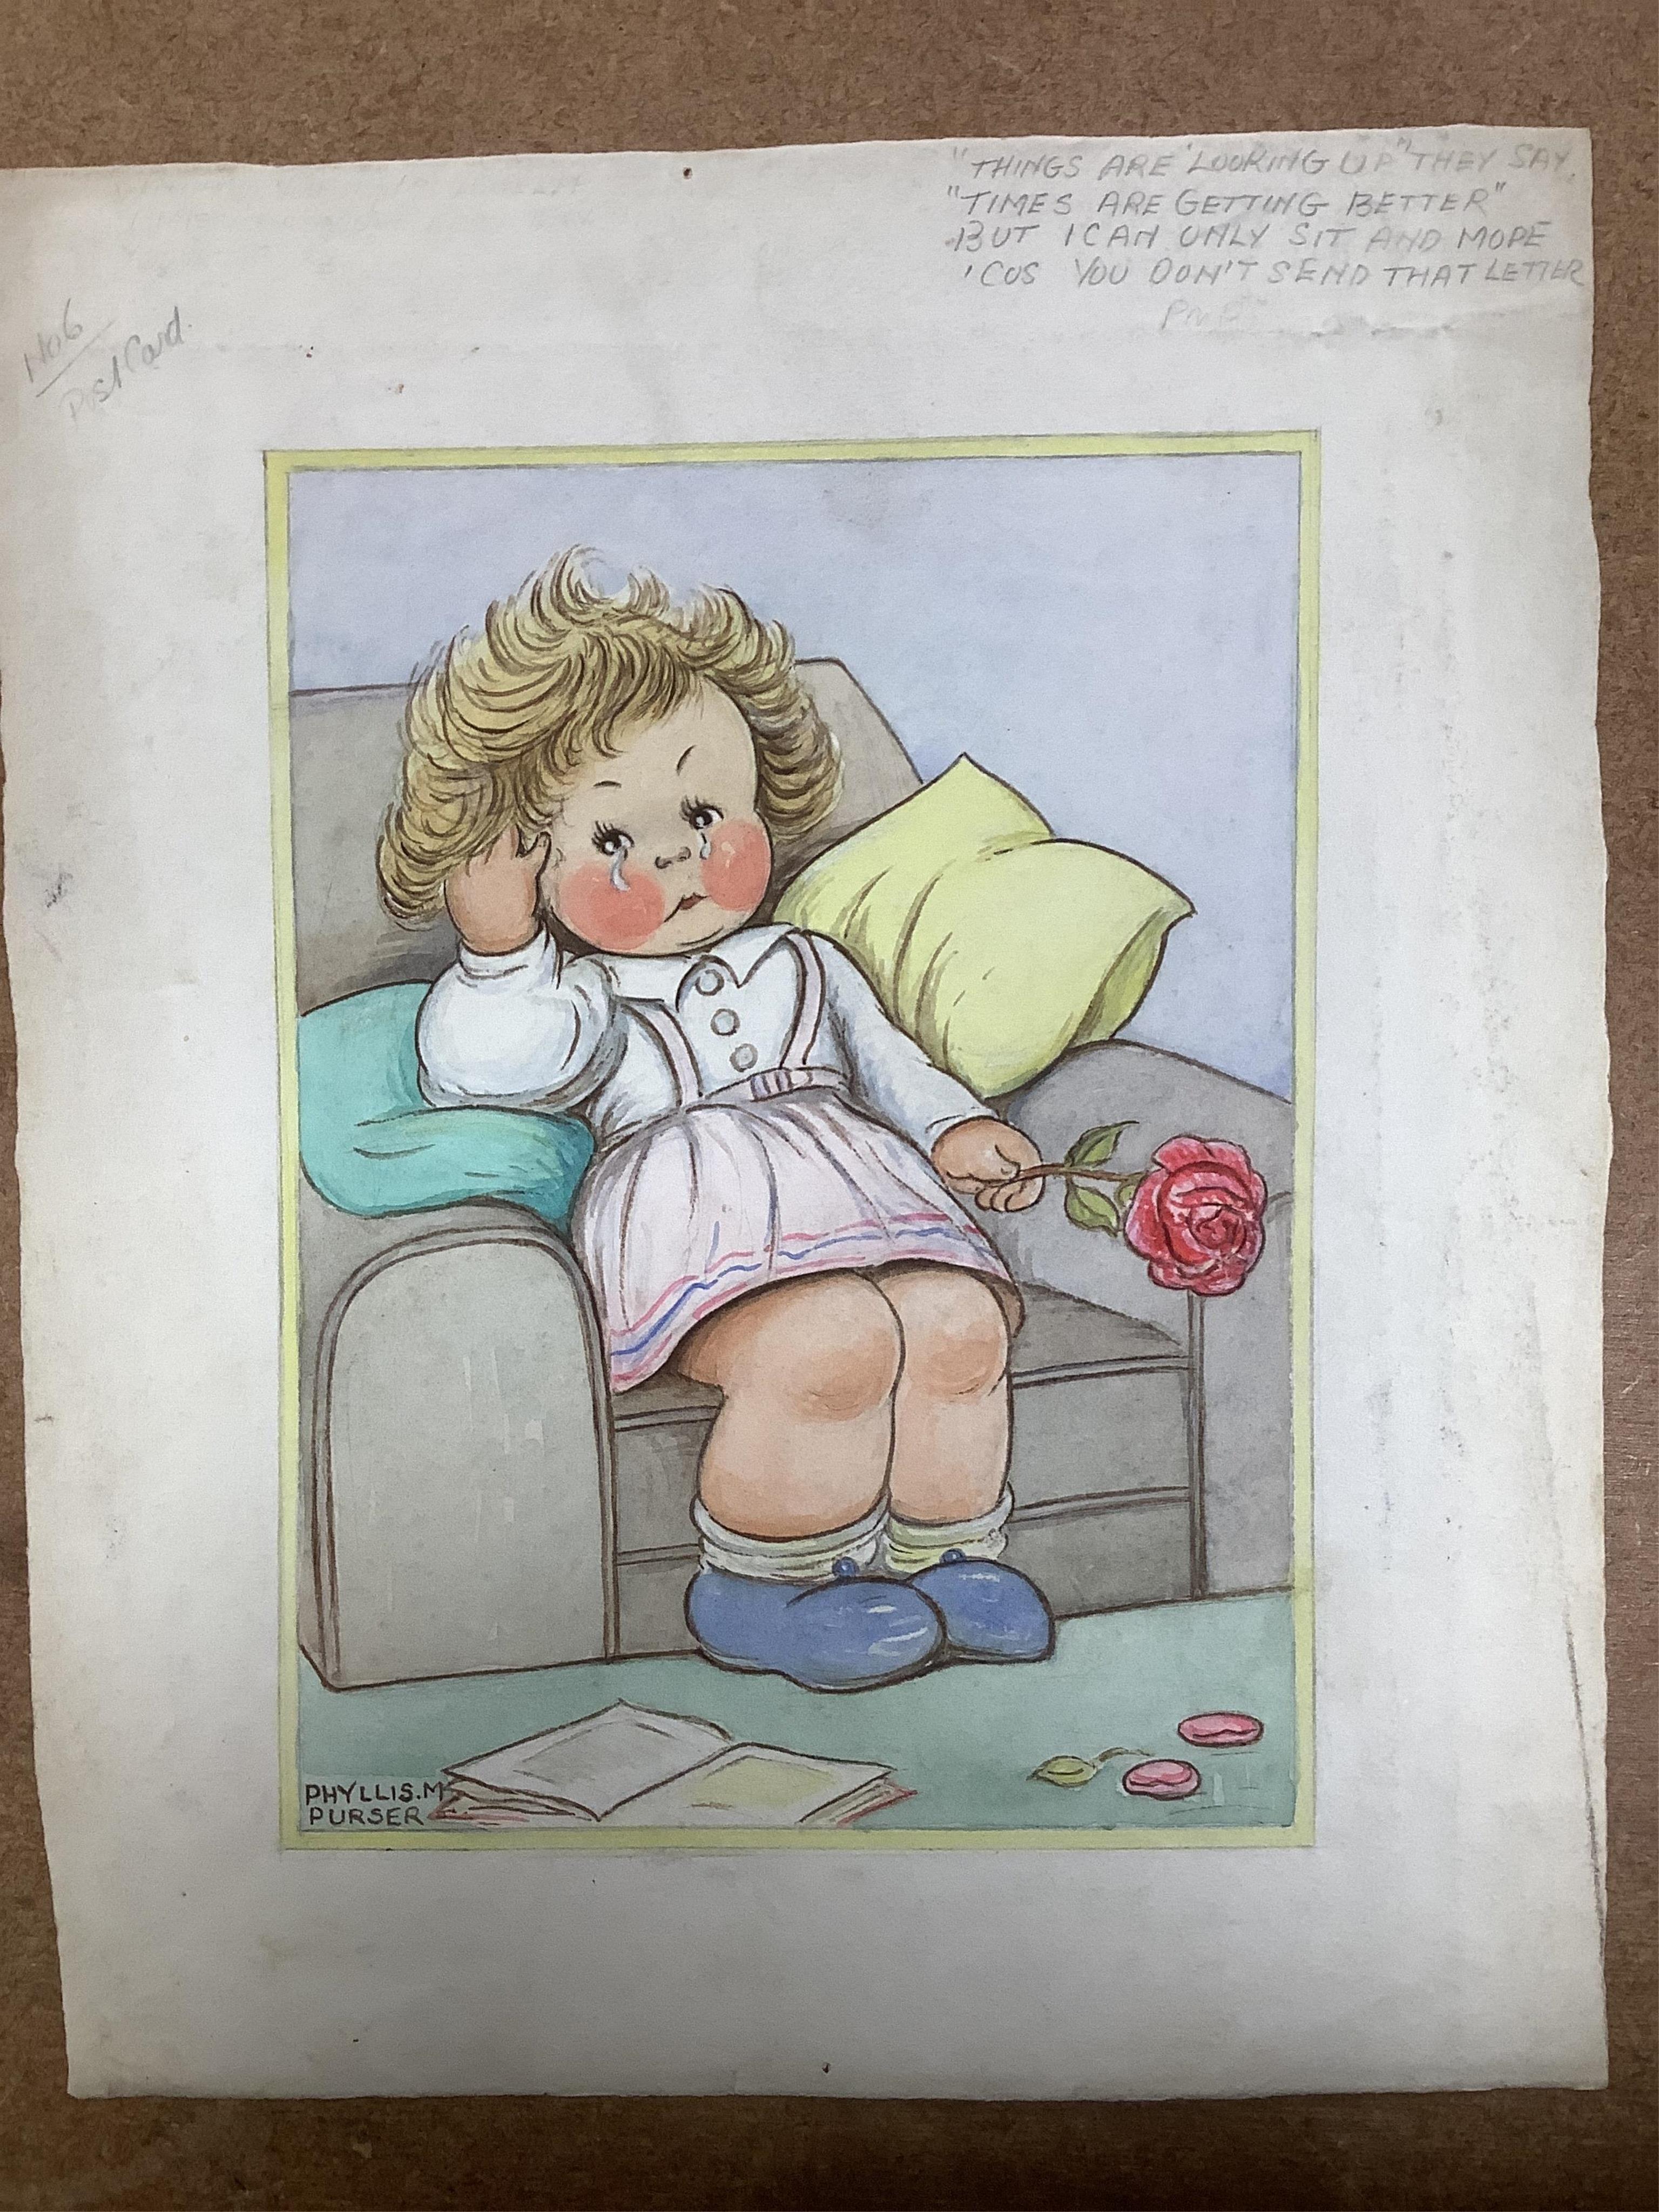 Phyllis Purser (1893-1990), six original watercolours on card for postcard designs, Humourous children, each signed, unframed, largest 39 x 28cm. Condition - fair, discolouration and creasing to the edges